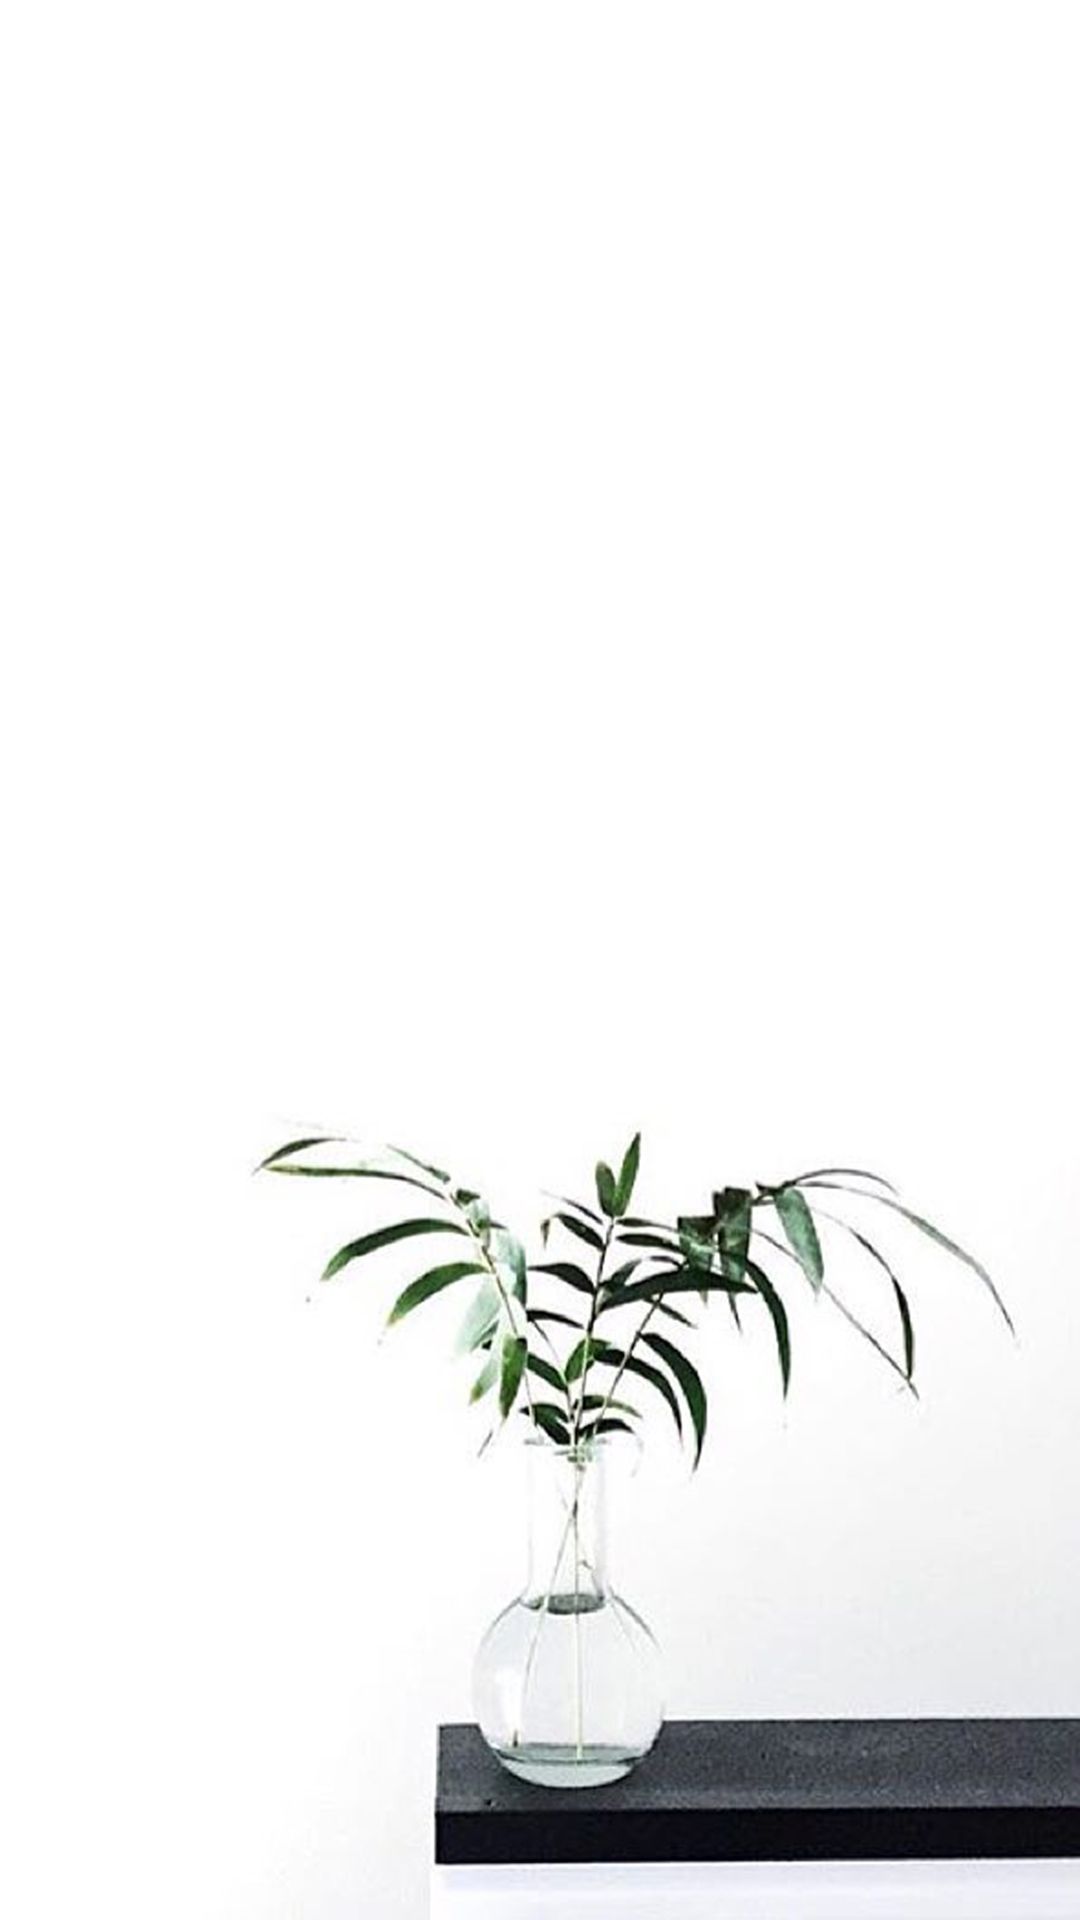 A plant in a vase sitting on a table. - Clean